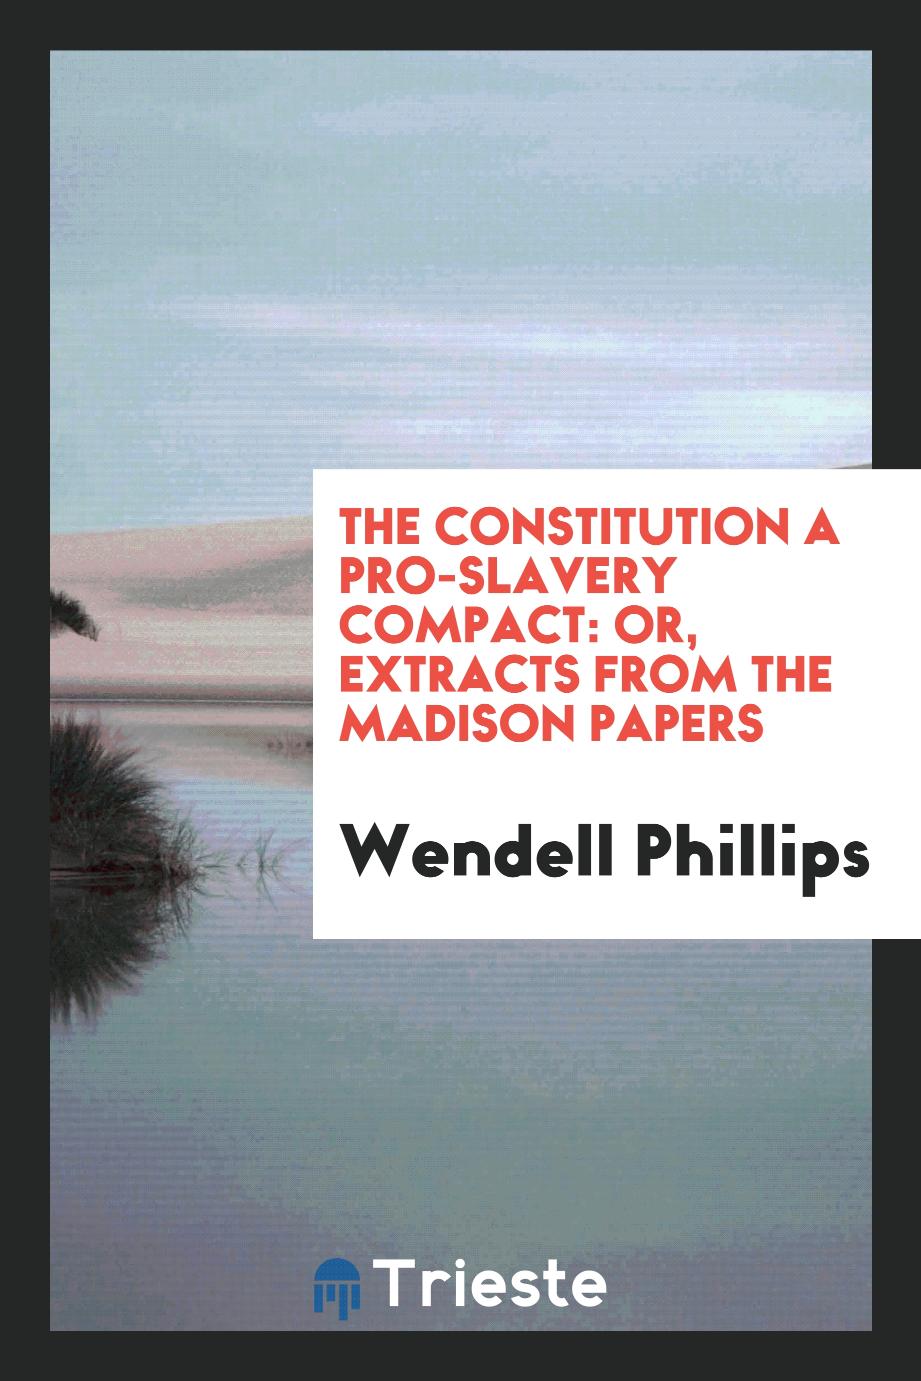 Wendell Phillips - The Constitution a pro-slavery compact: or, Extracts from the Madison papers